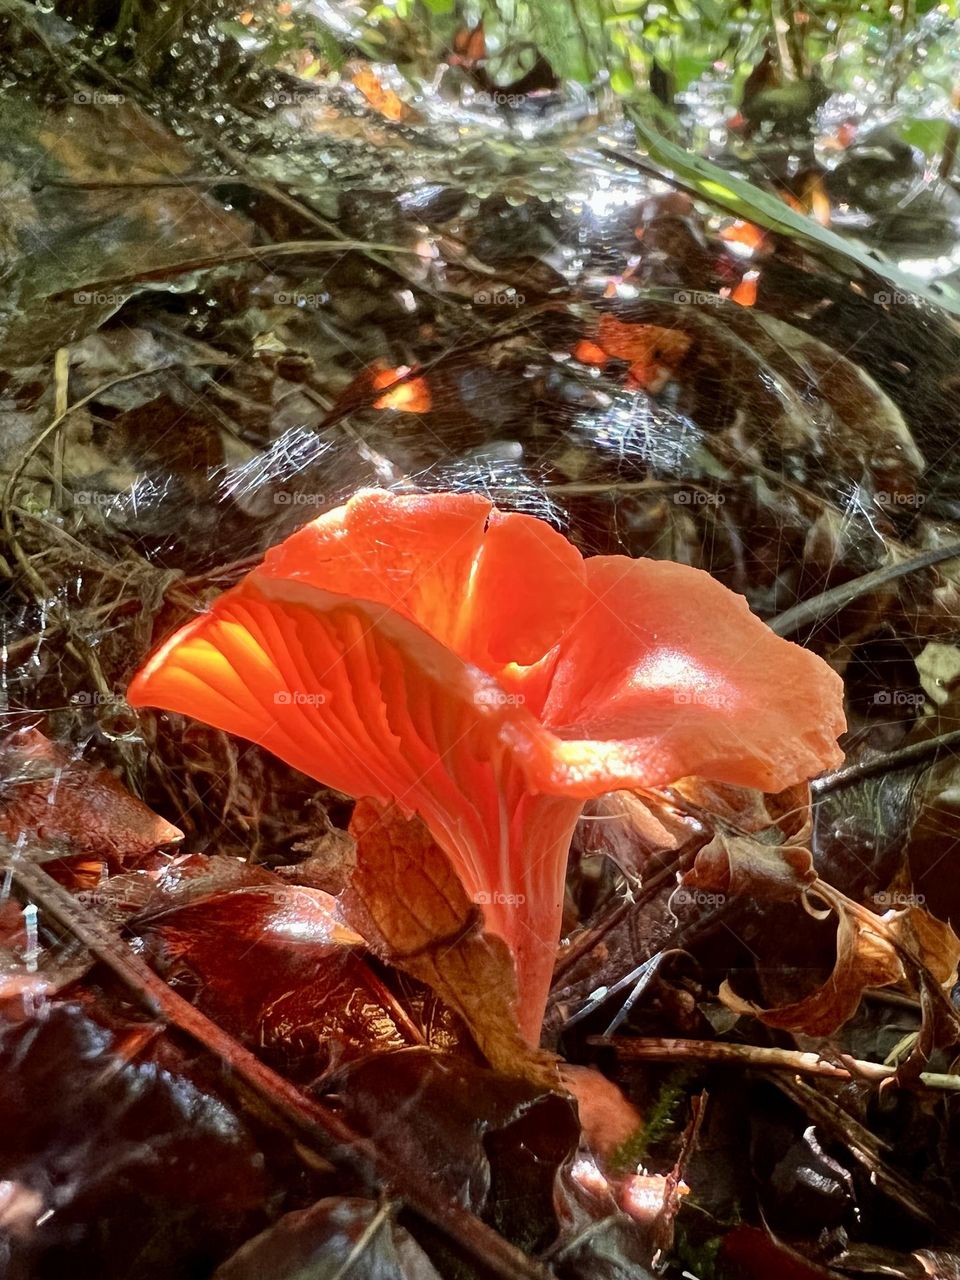 A lone cinnabar chanterelle mushroom in dappled shade and sun on the forest floor in the US. The glow of the orange color and the light on the leaves and spiderwebs evoke magic